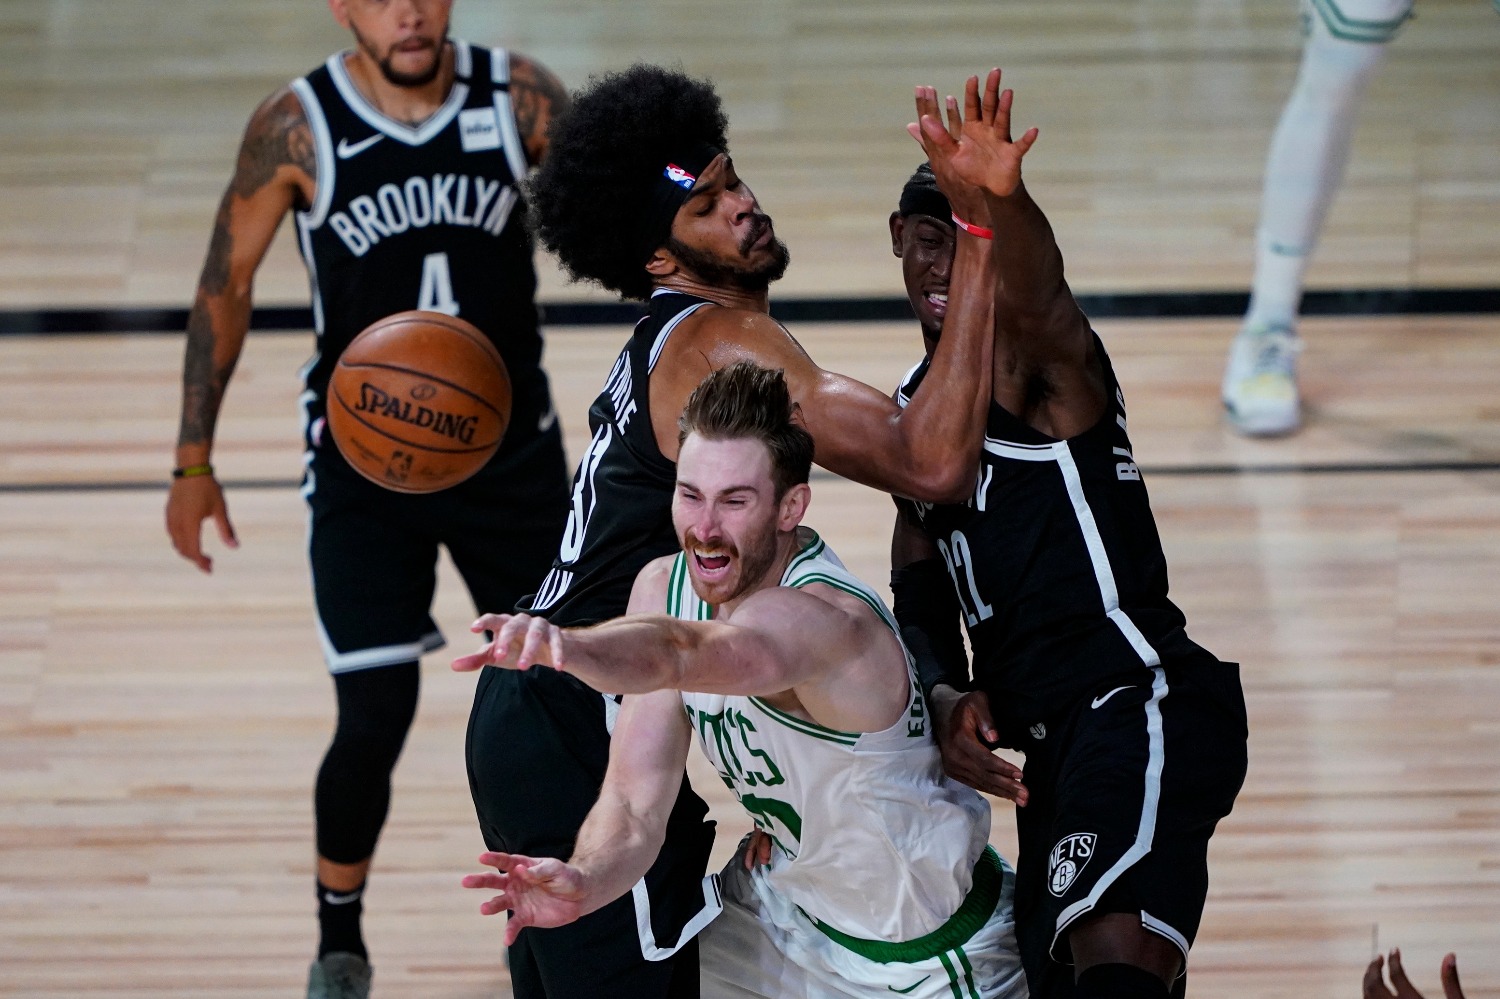 The Boston Celtics will be without Gordon Hayward for four weeks as they try to capture an NBA title.